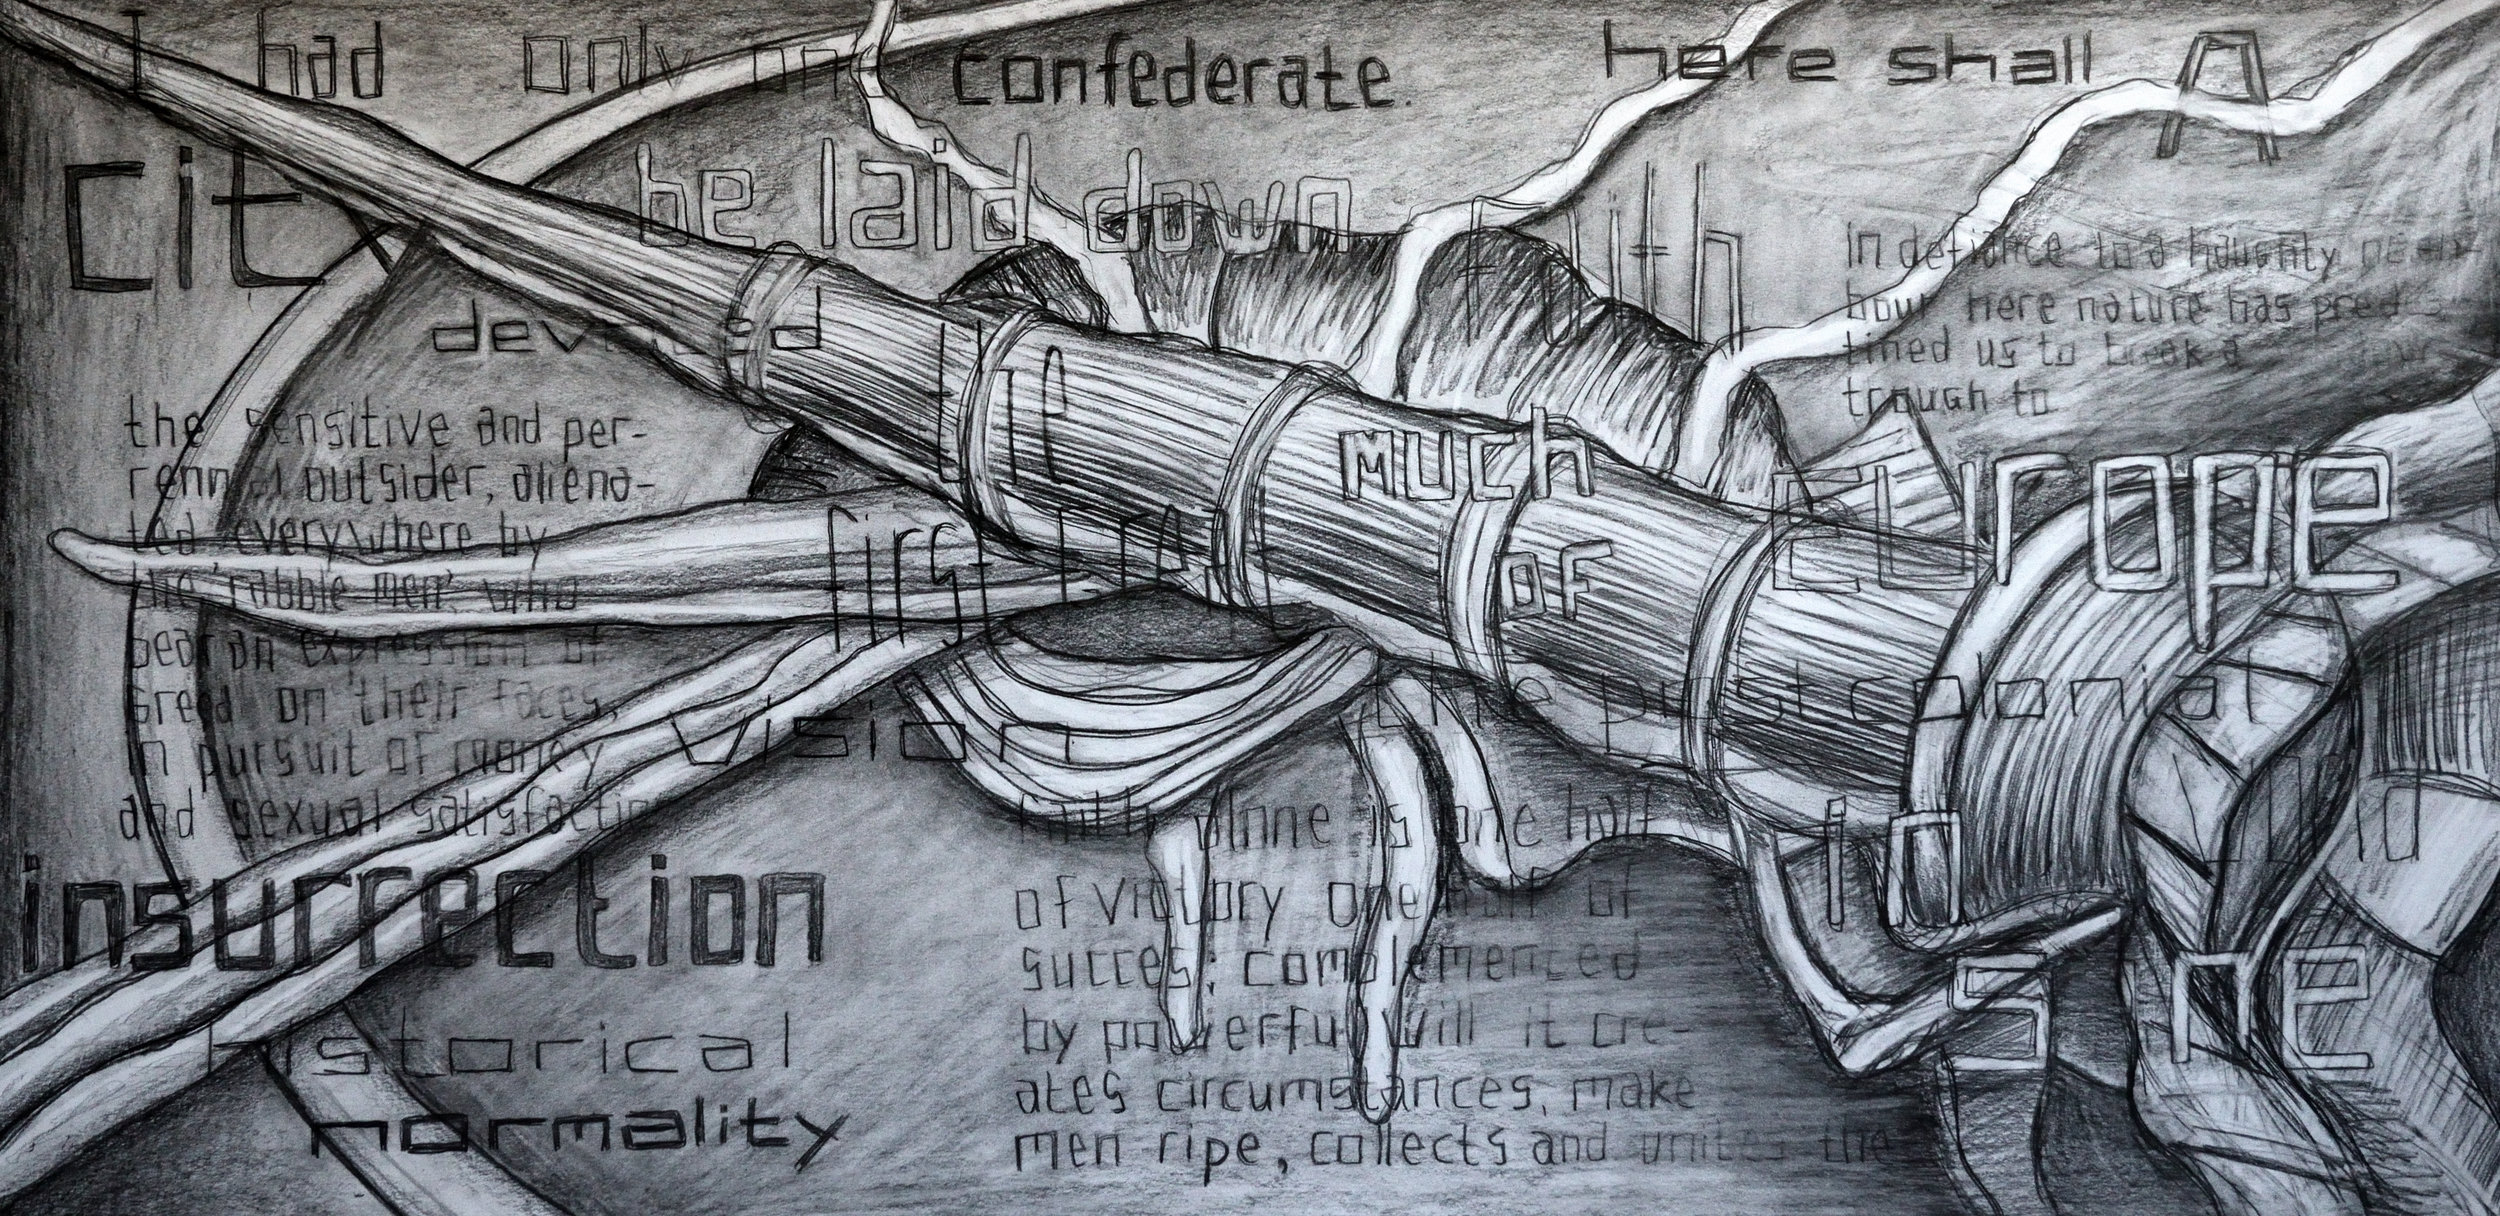 Here Shall a Devoted Vision be Laid Down, pencil on paper, 70x140cm